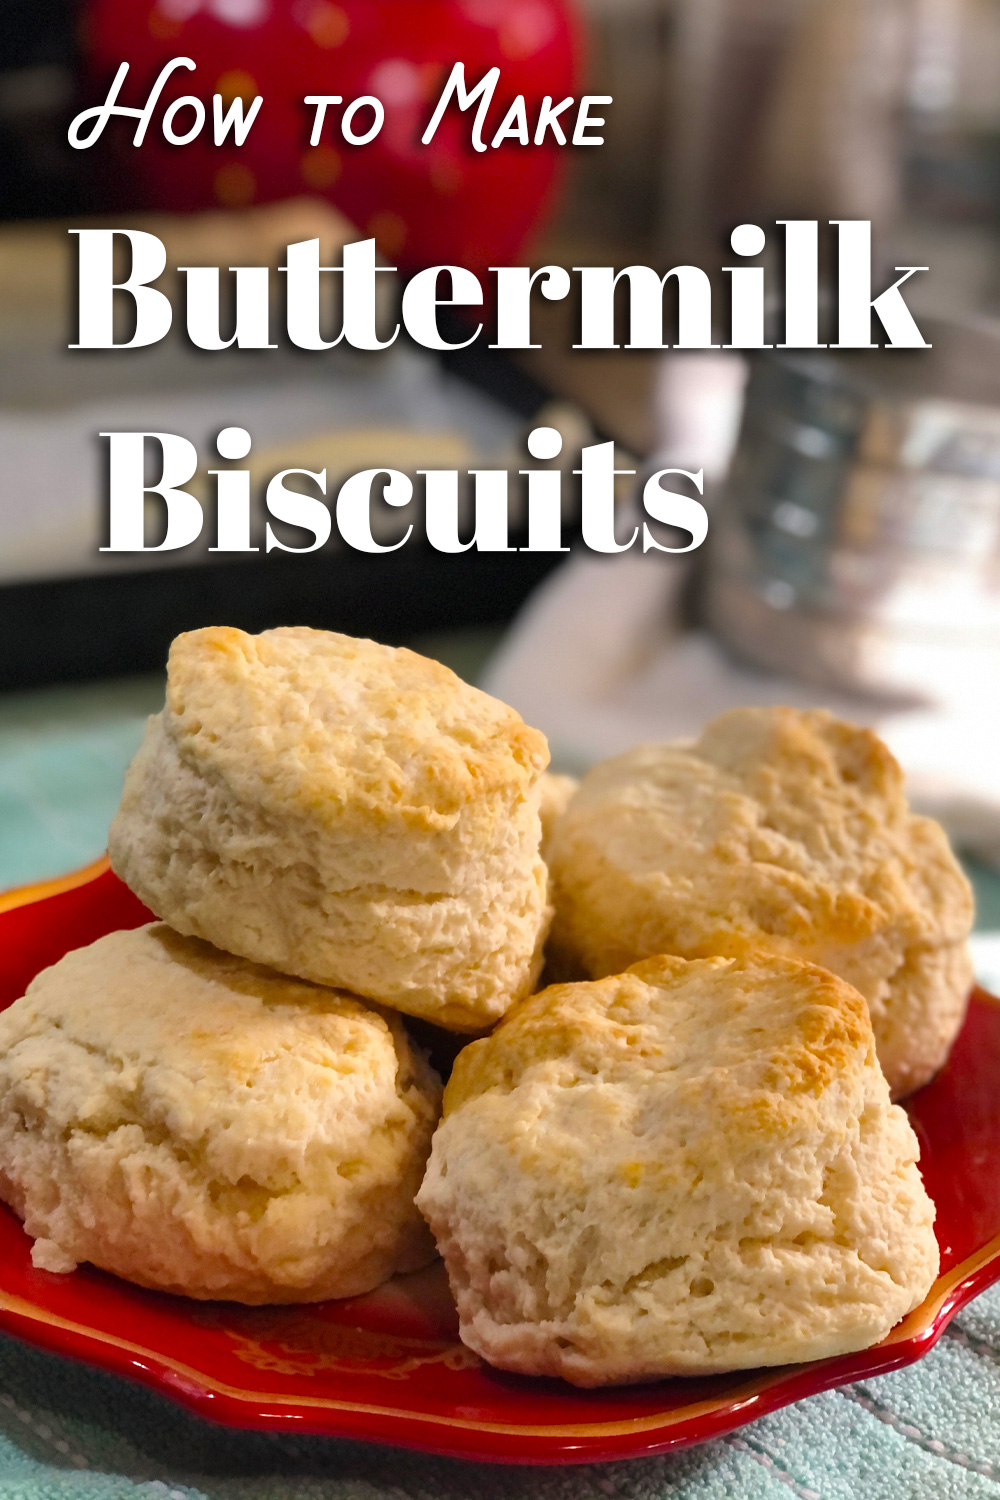 How to Make Buttermilk Biscuits – Perfect, fluffy biscuits every time!